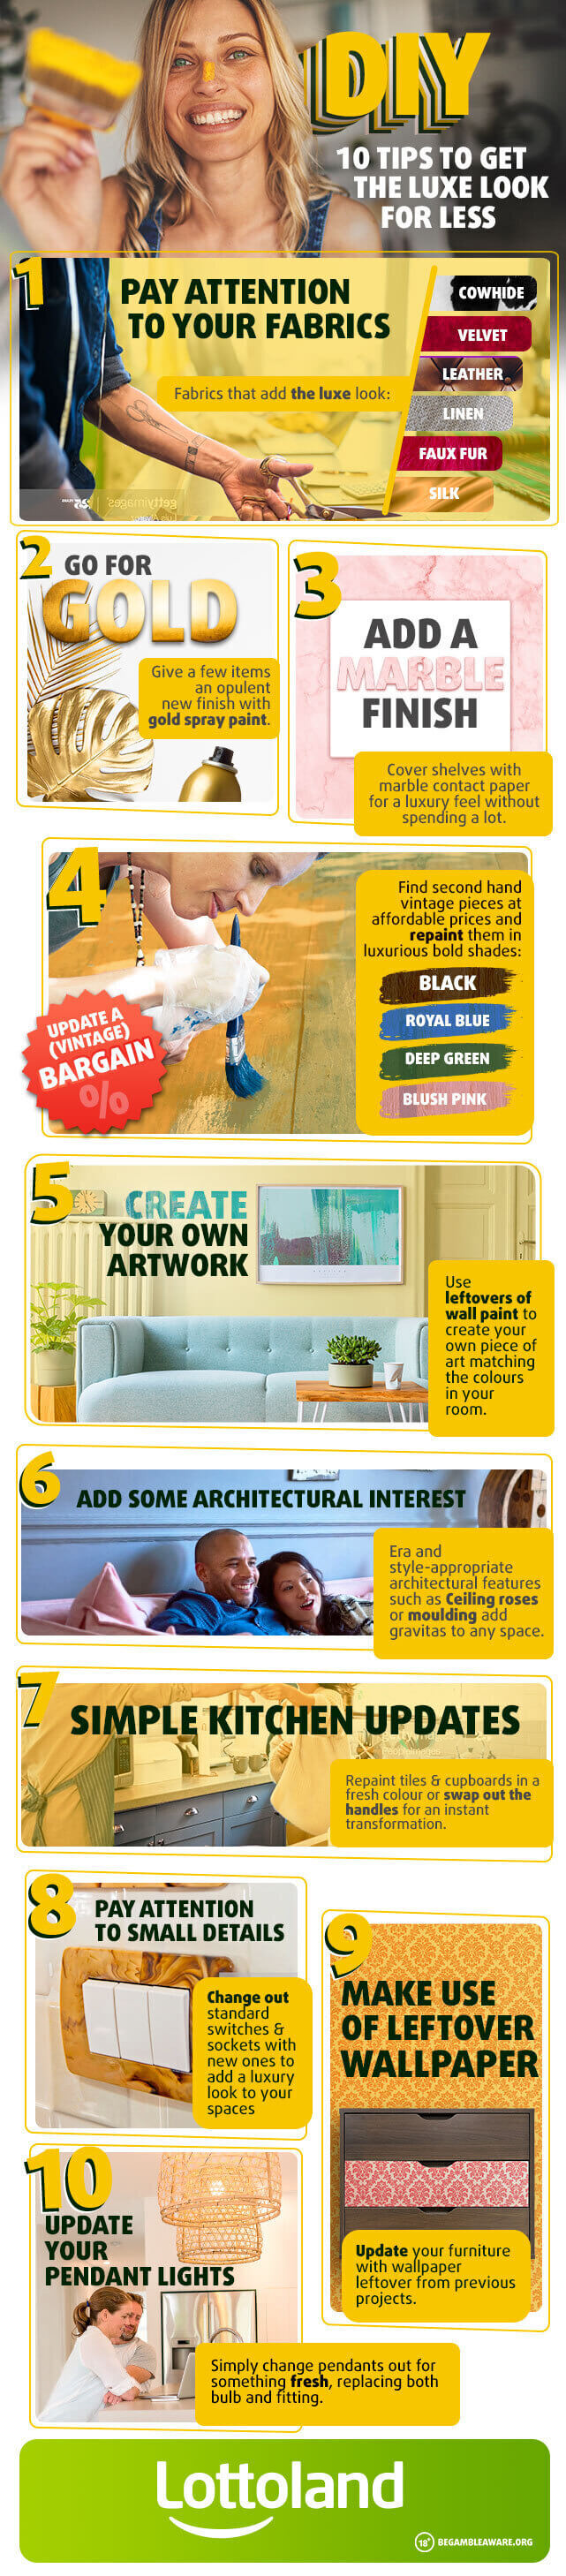 Infographic with 10 tips on how to get the luxe look for less